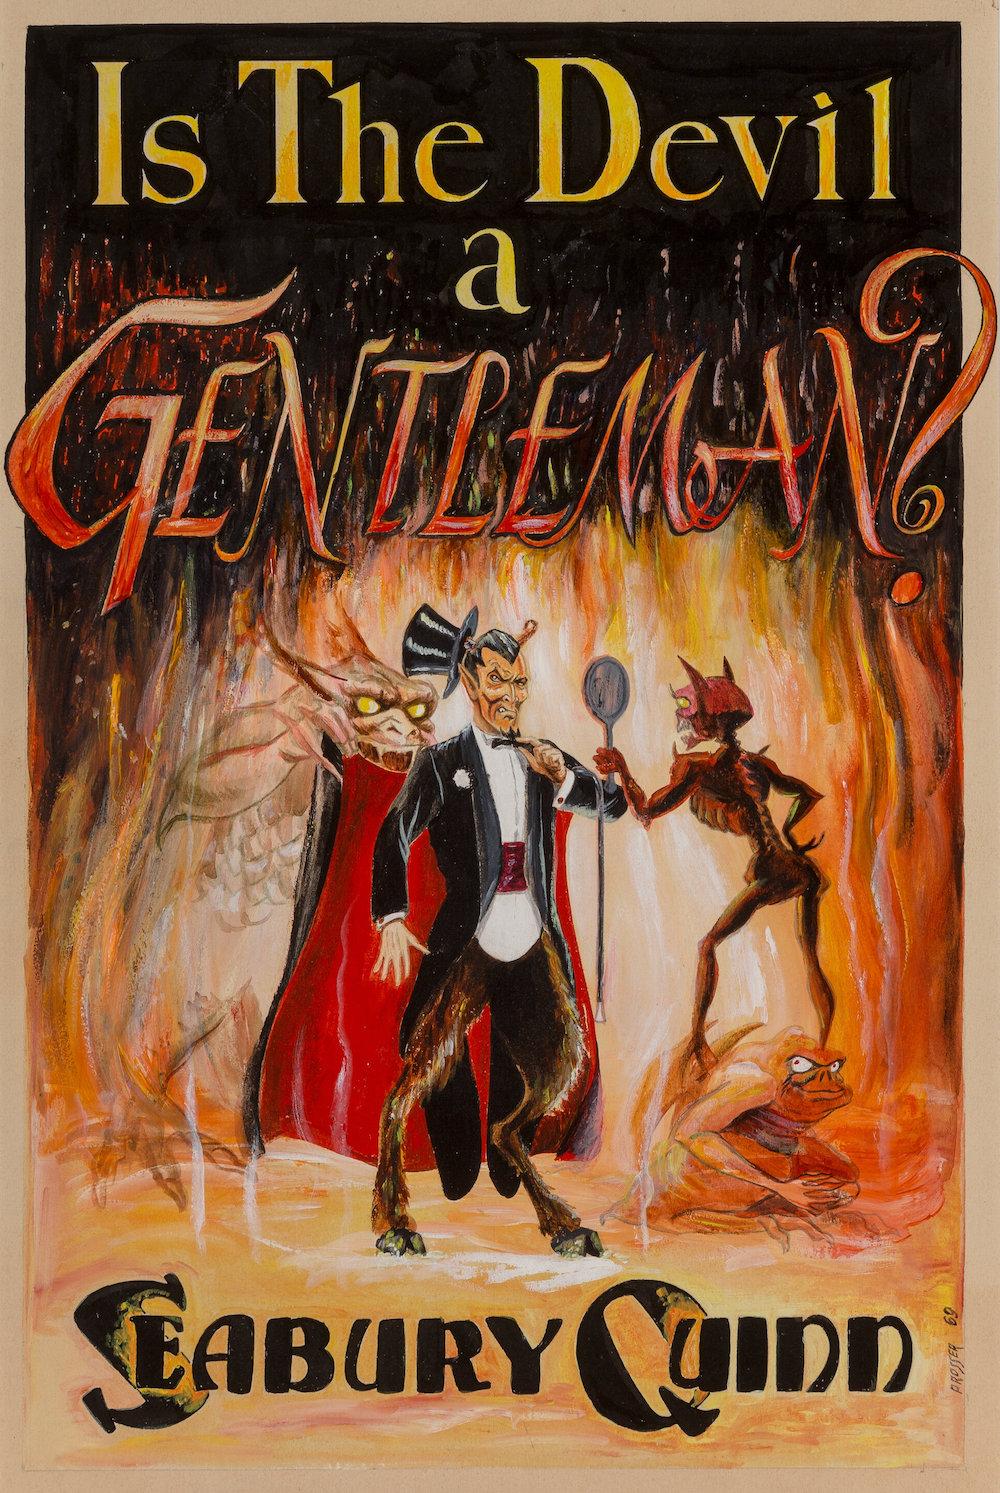 Is the Devil a Gentleman book cover by David Prosser